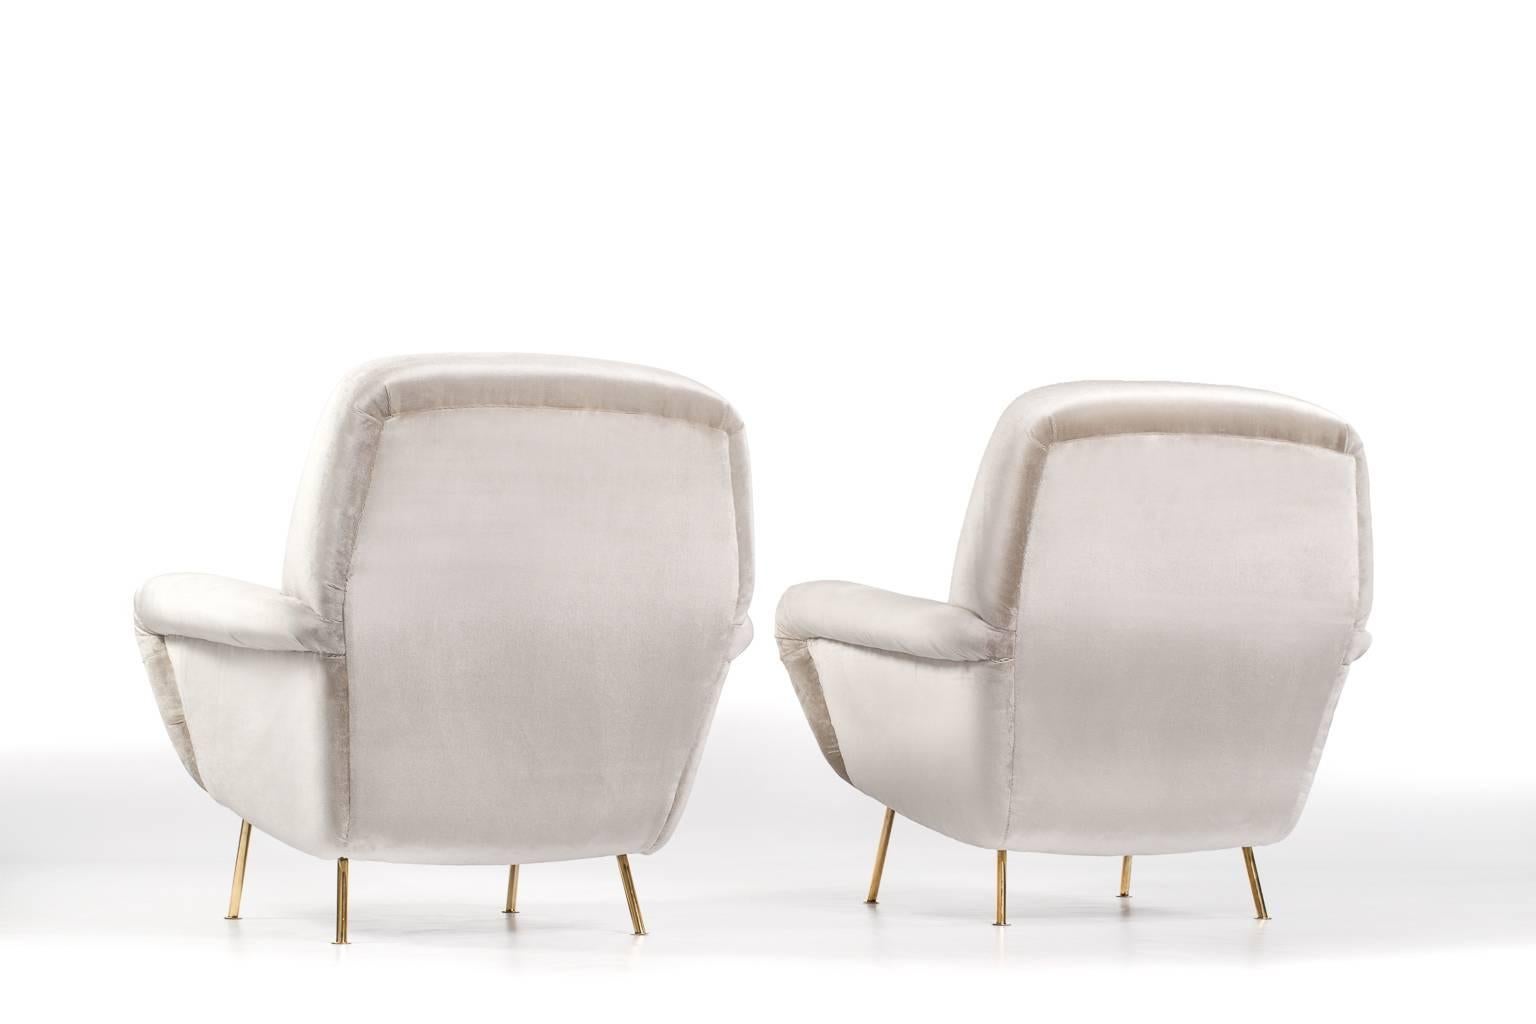 Polished Pair of Armchairs by Gianfranco Frattini for Cassina, Italy, 1954